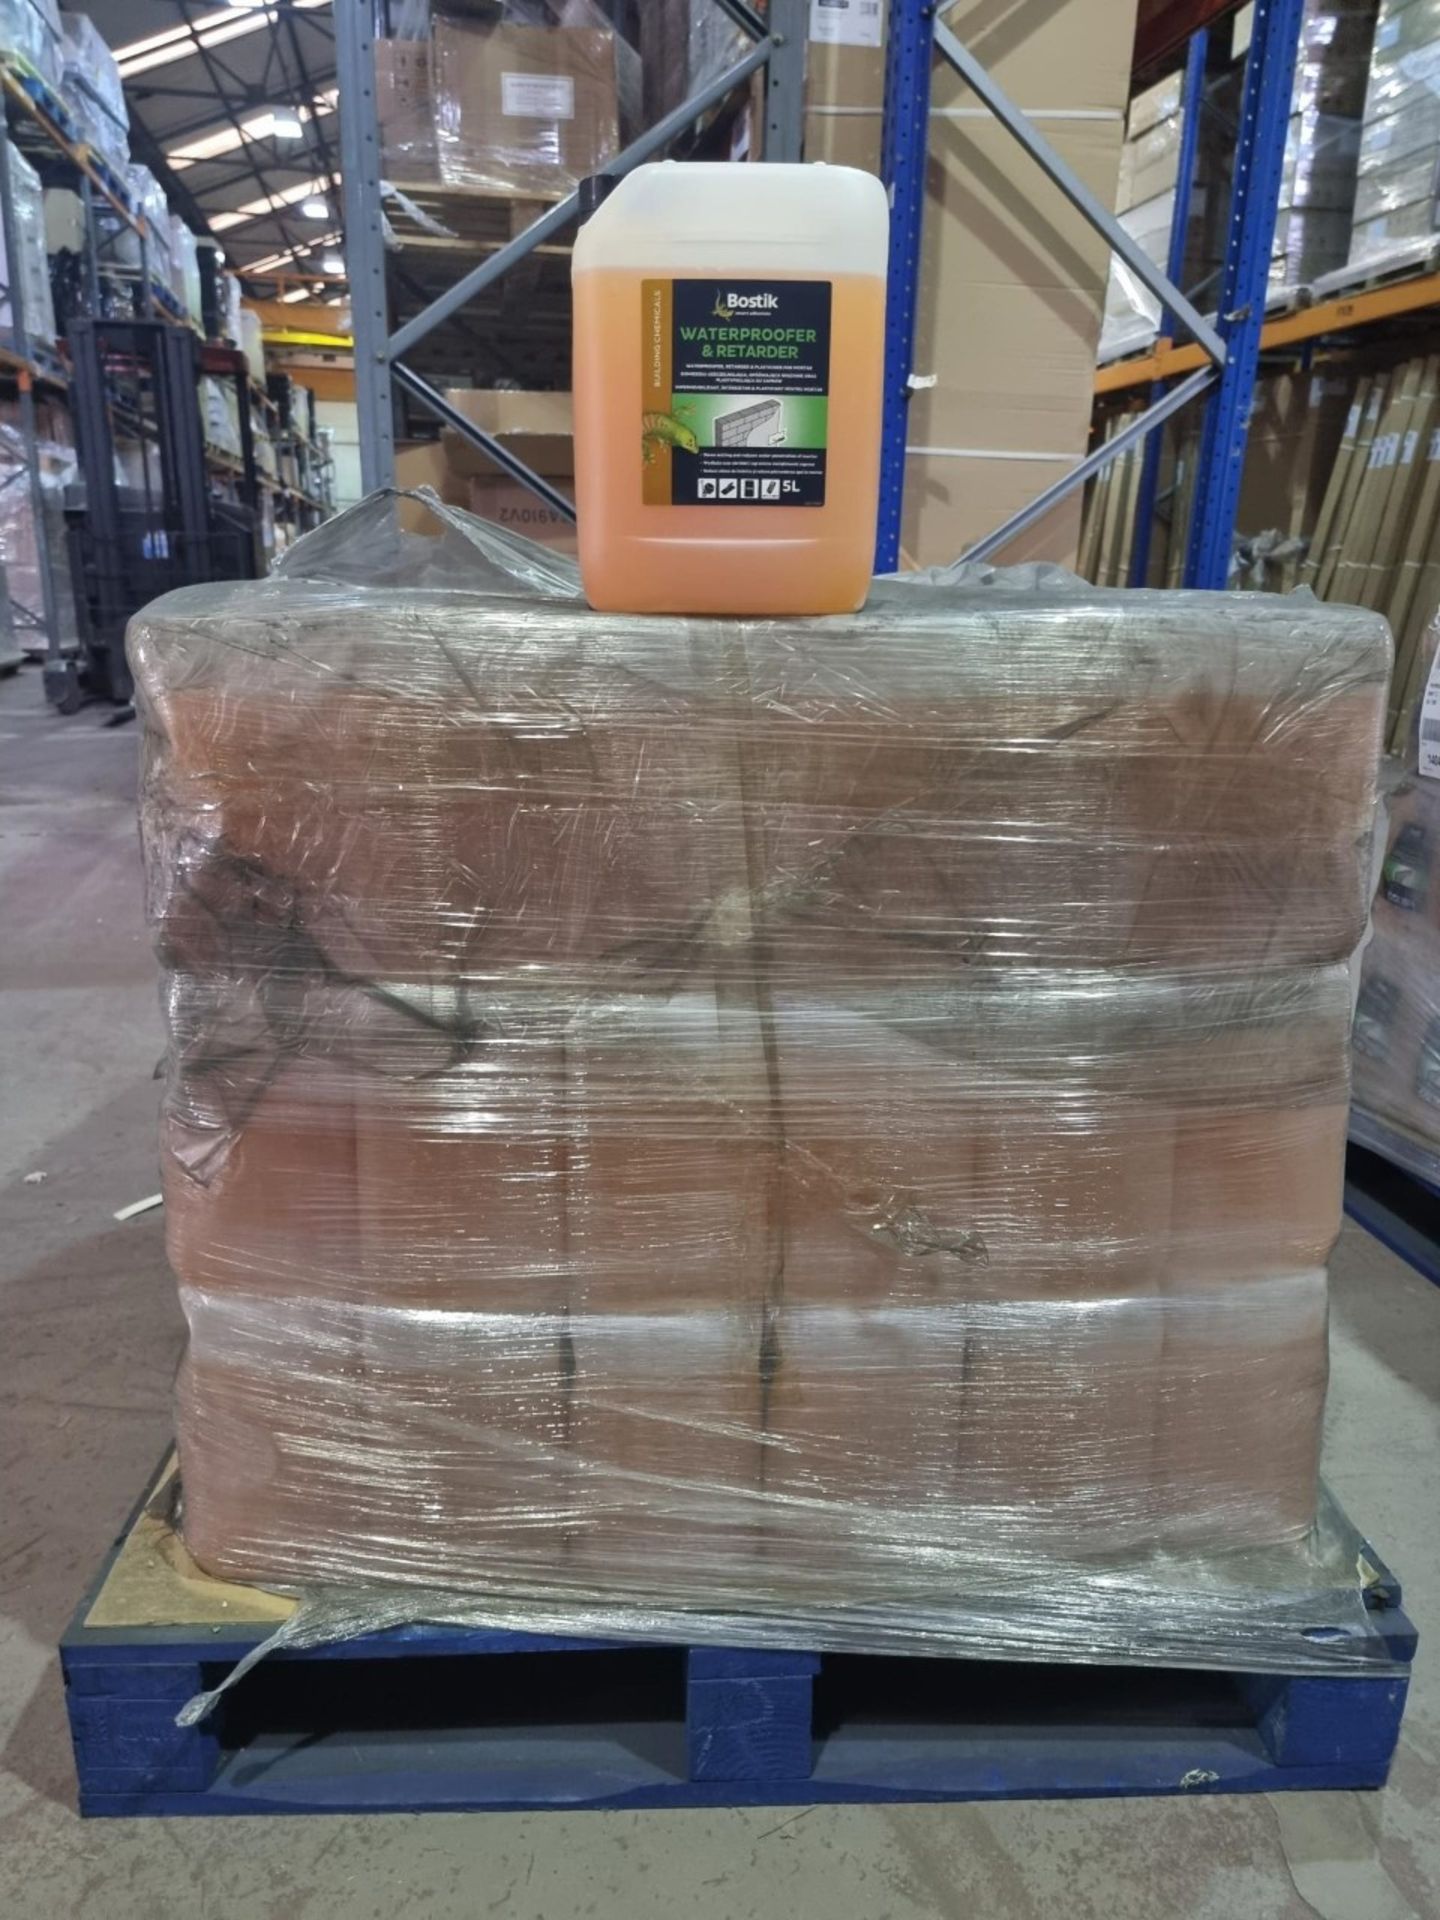 (B130) PALLET TO CONTAIN 54 x 5L TUBS OF BOSTIK WATERPROOFER & RETARDER. RRP £22 PER TUB - Image 2 of 2